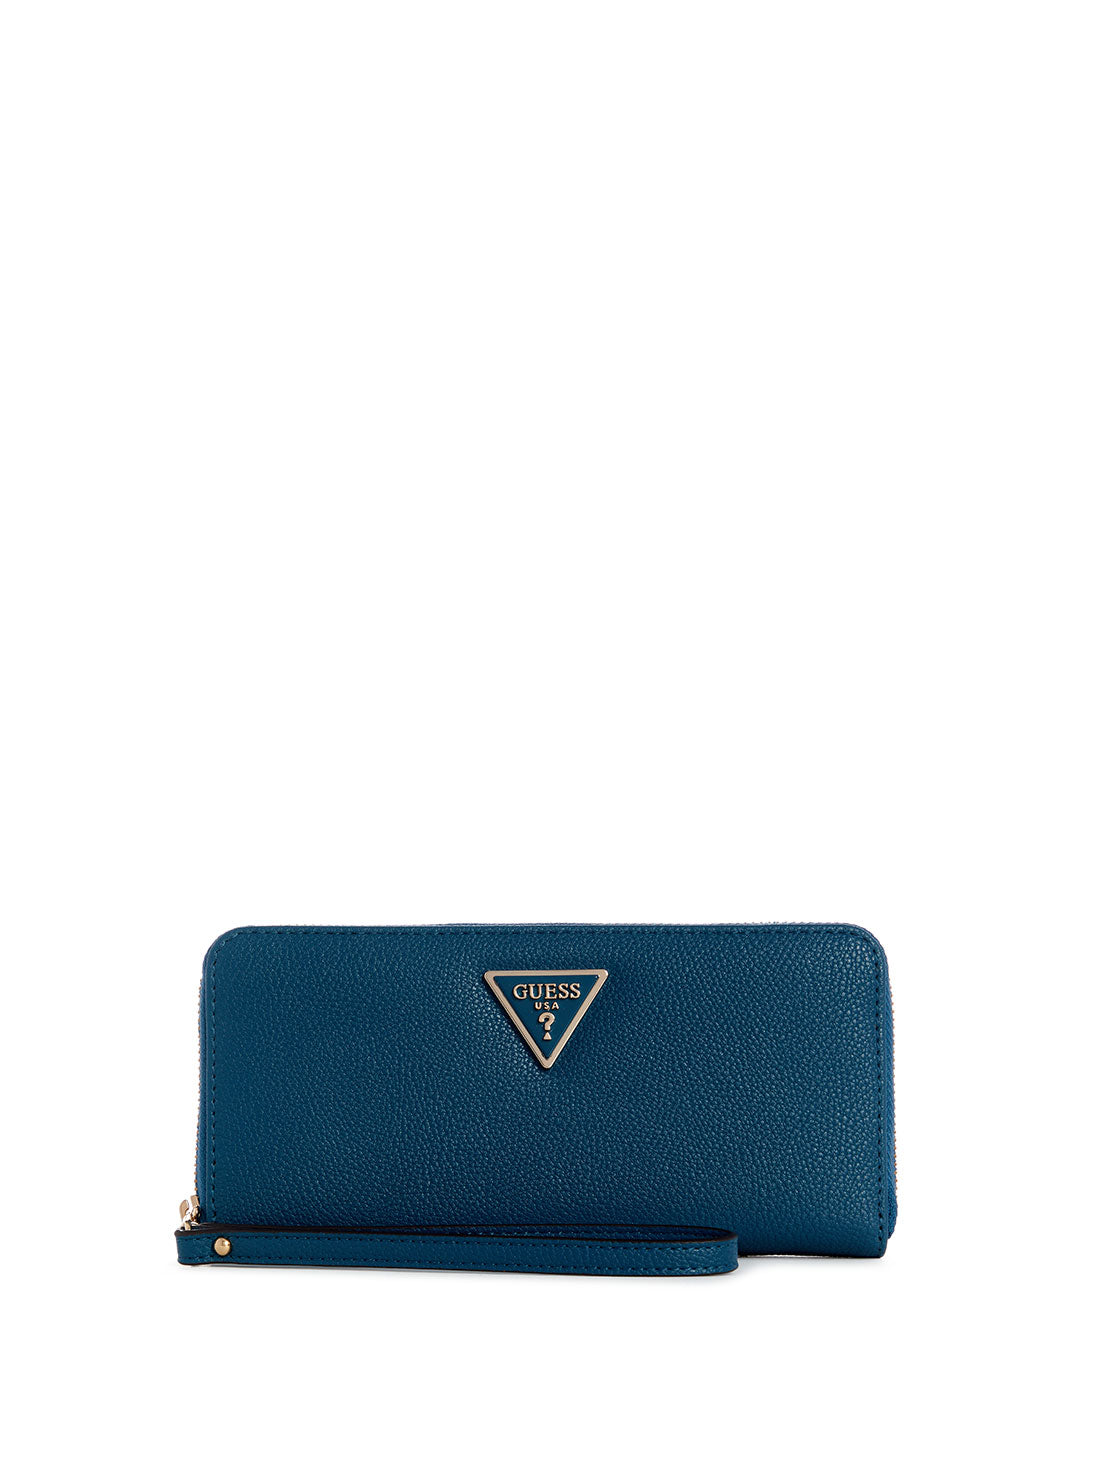 GUESS Blue Meridian Large Wallet front view